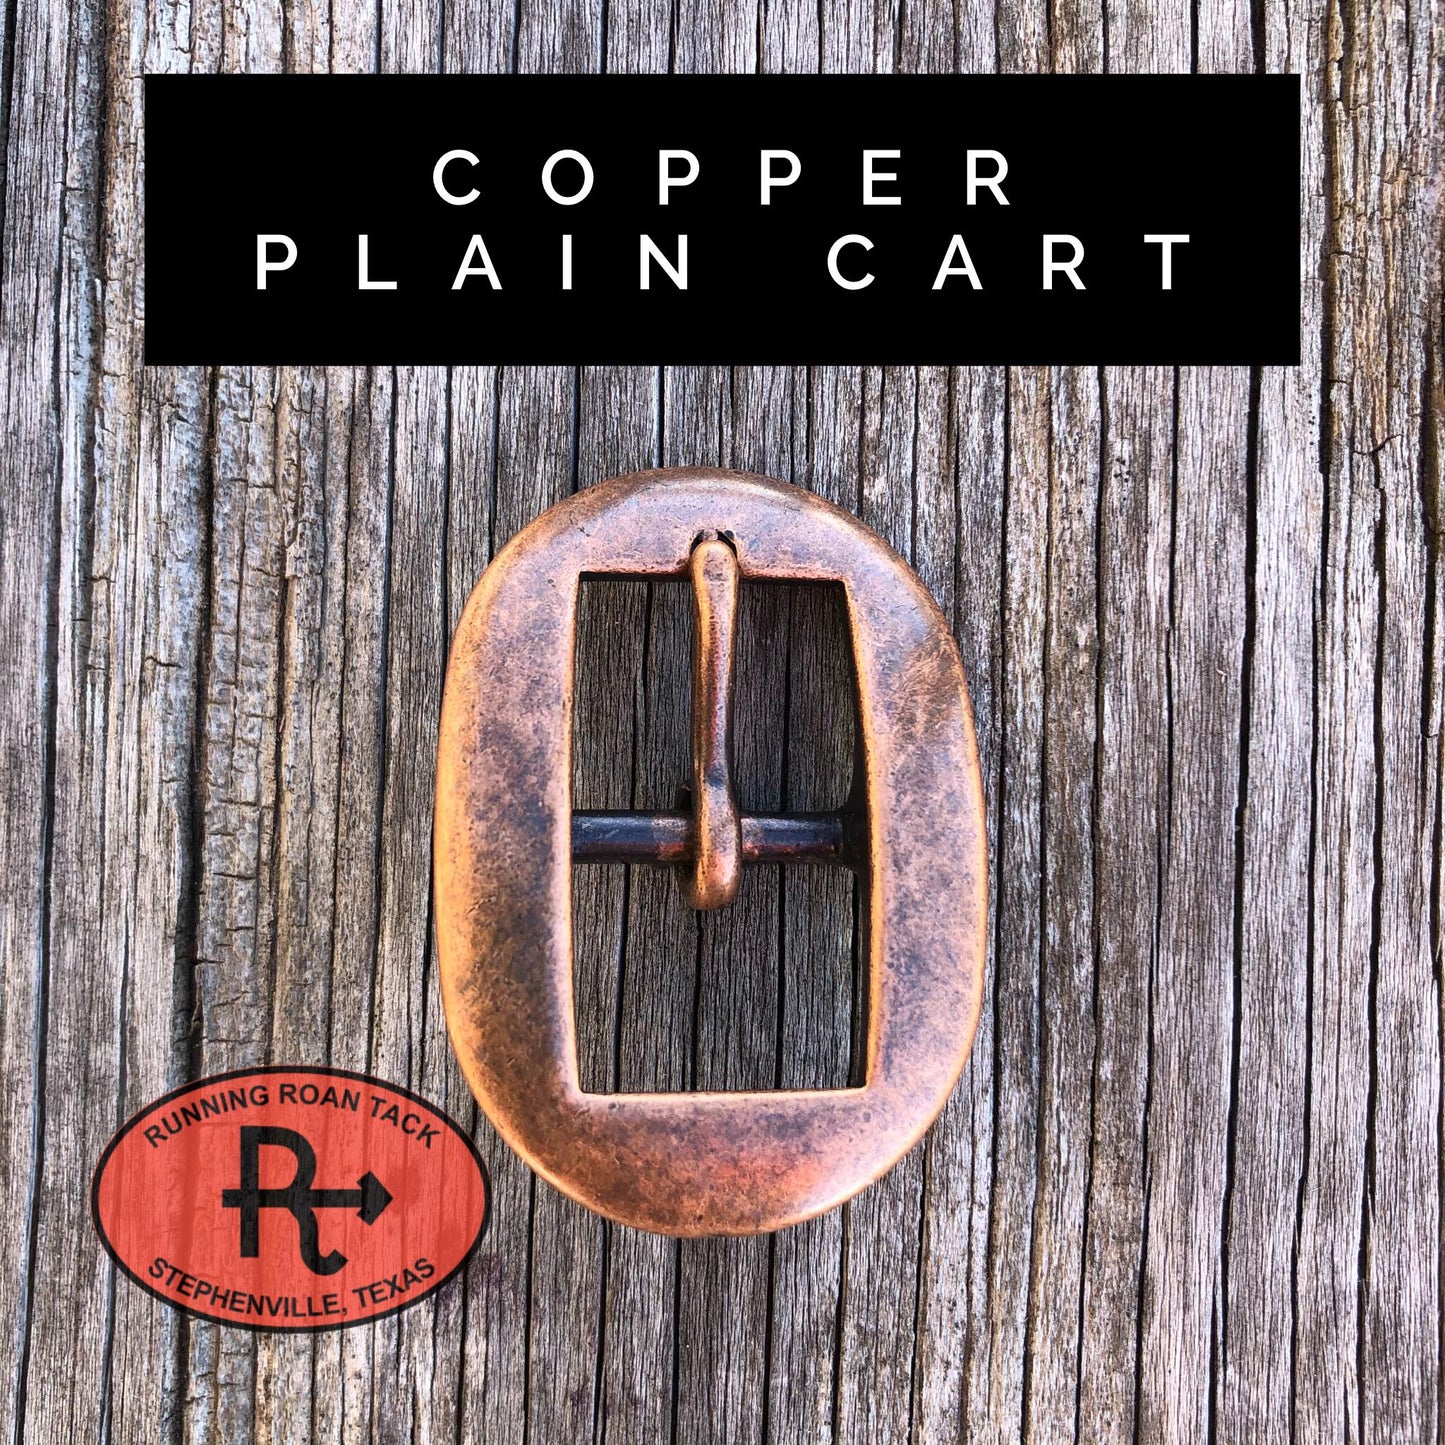 Copper Tipped Croc Mini Saddle Bag with Your Choice of Buckle and Fringe for Phone, Keys, Roping Powder, etc